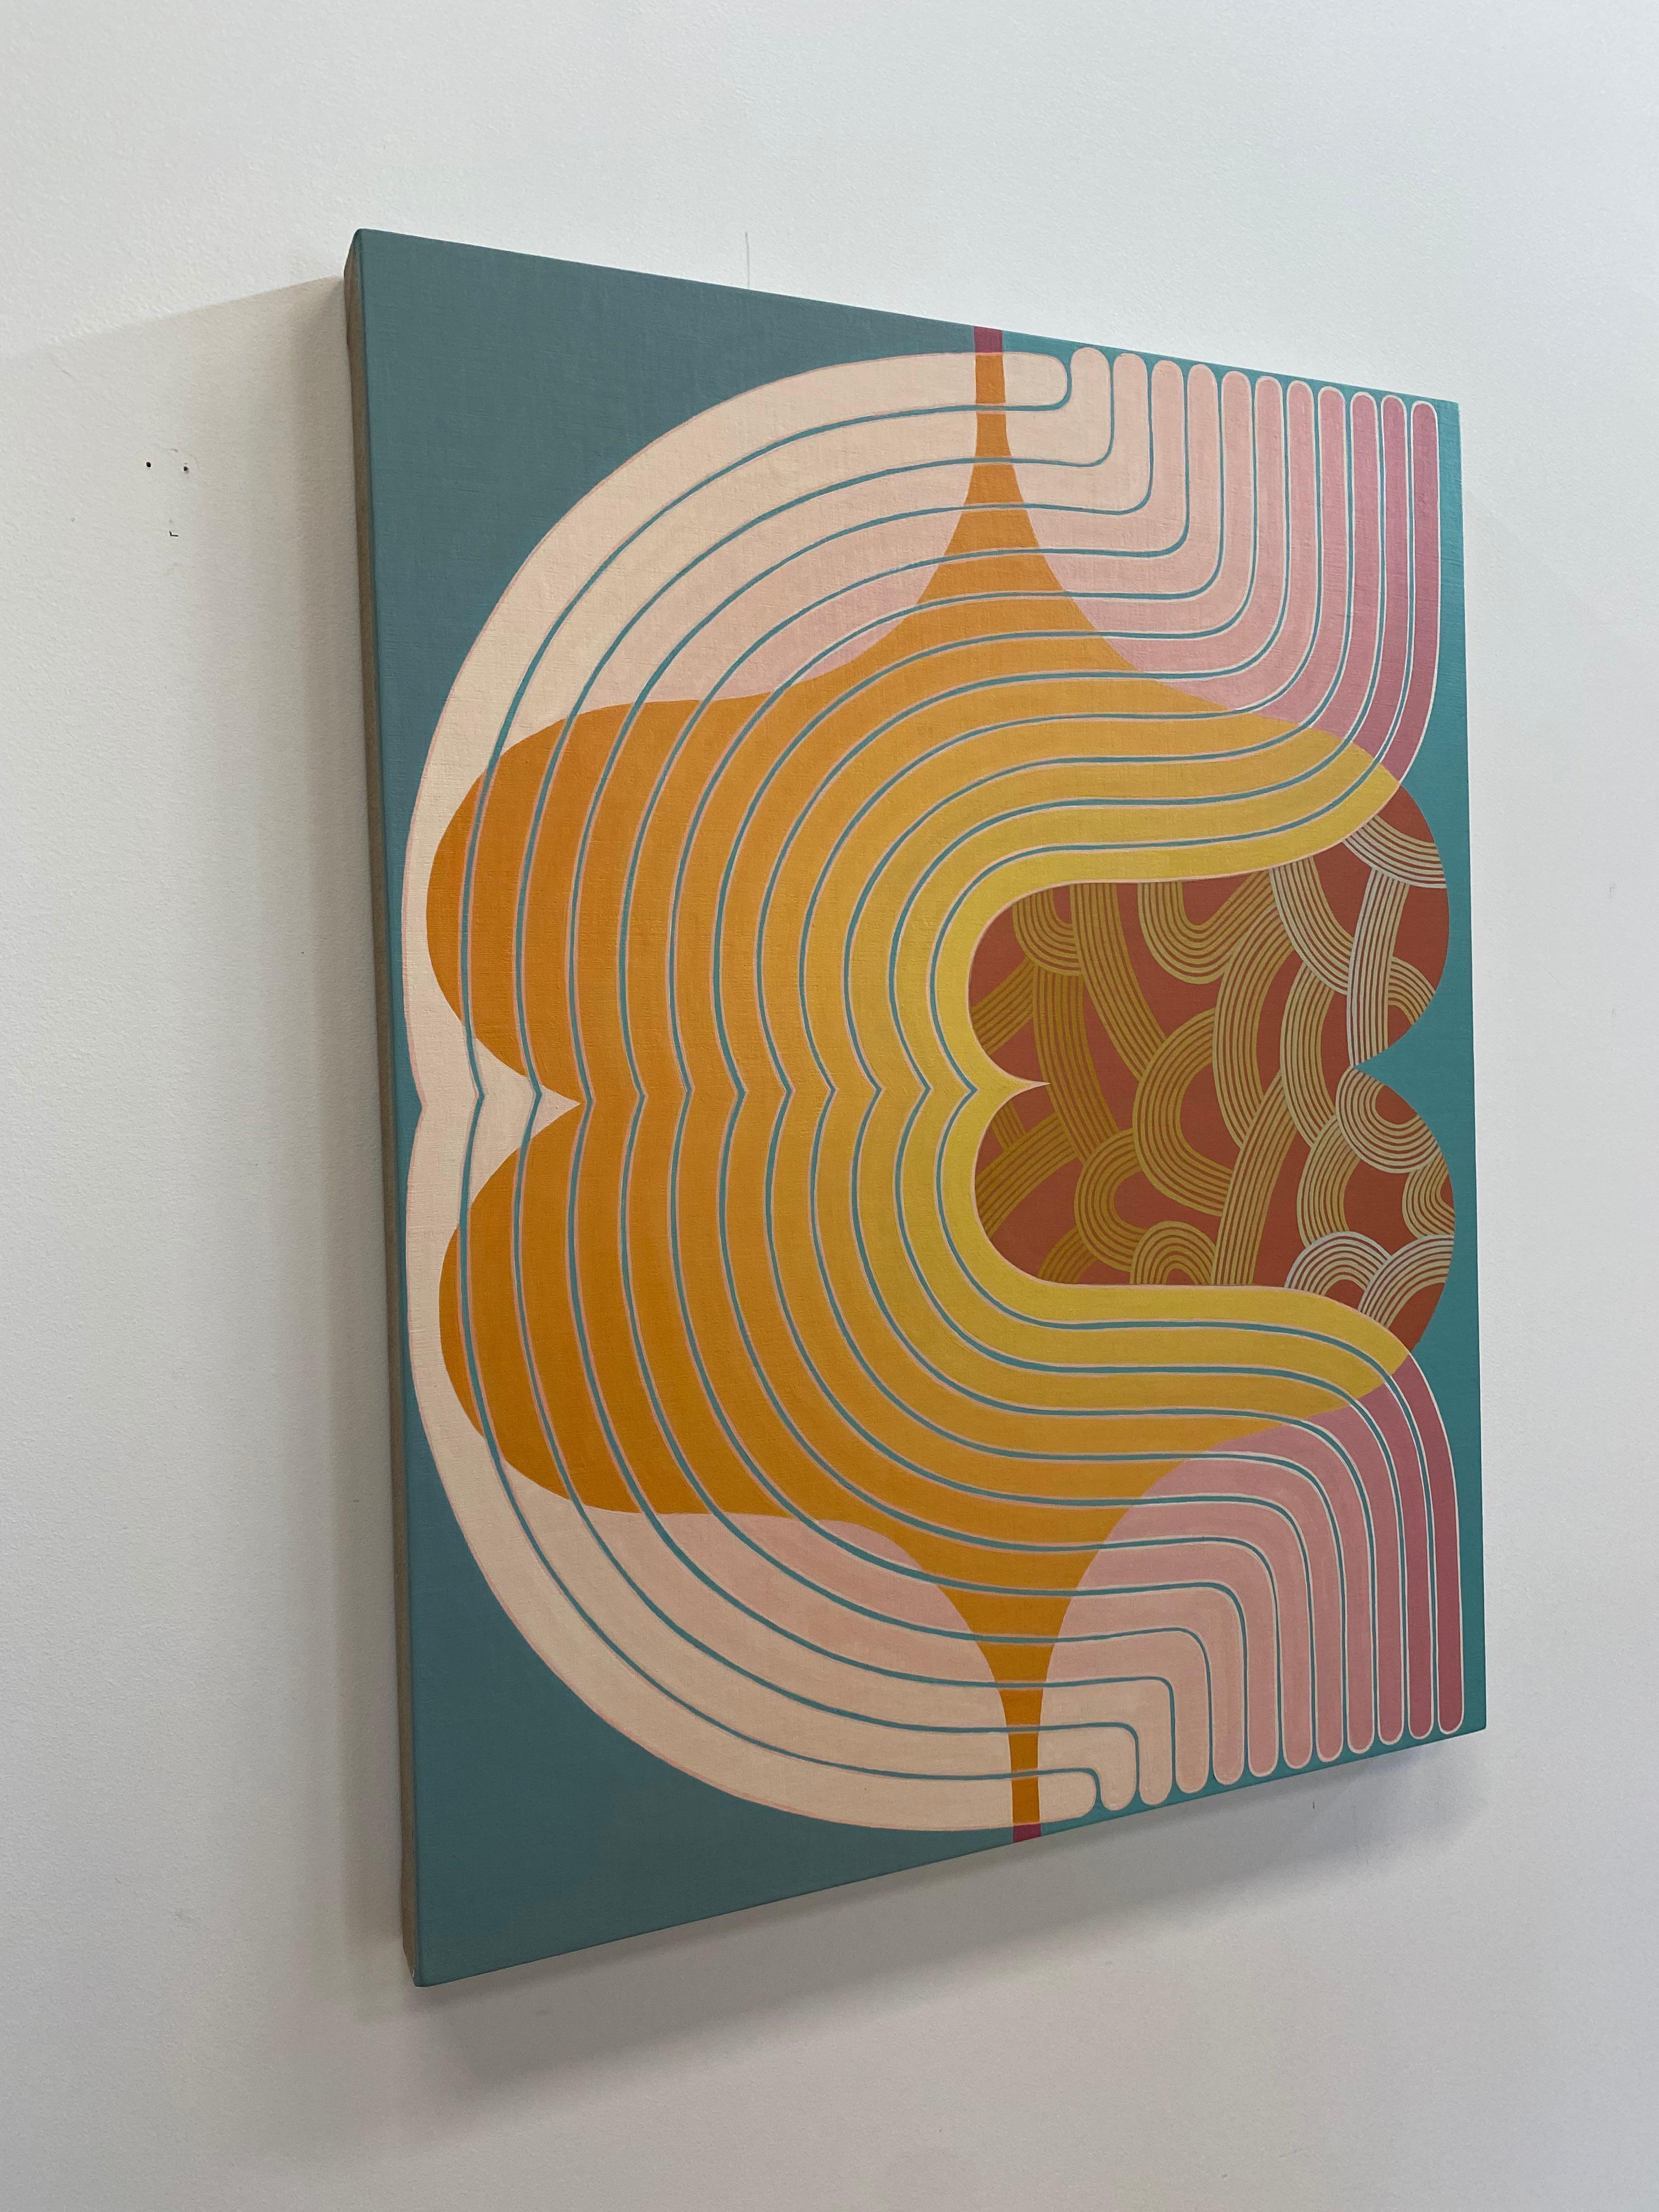 Sonics, Golden Orange, Pink, Teal, Dark Coral Geometric Abstract Curving Shapes - Contemporary Painting by Jenny Kemp